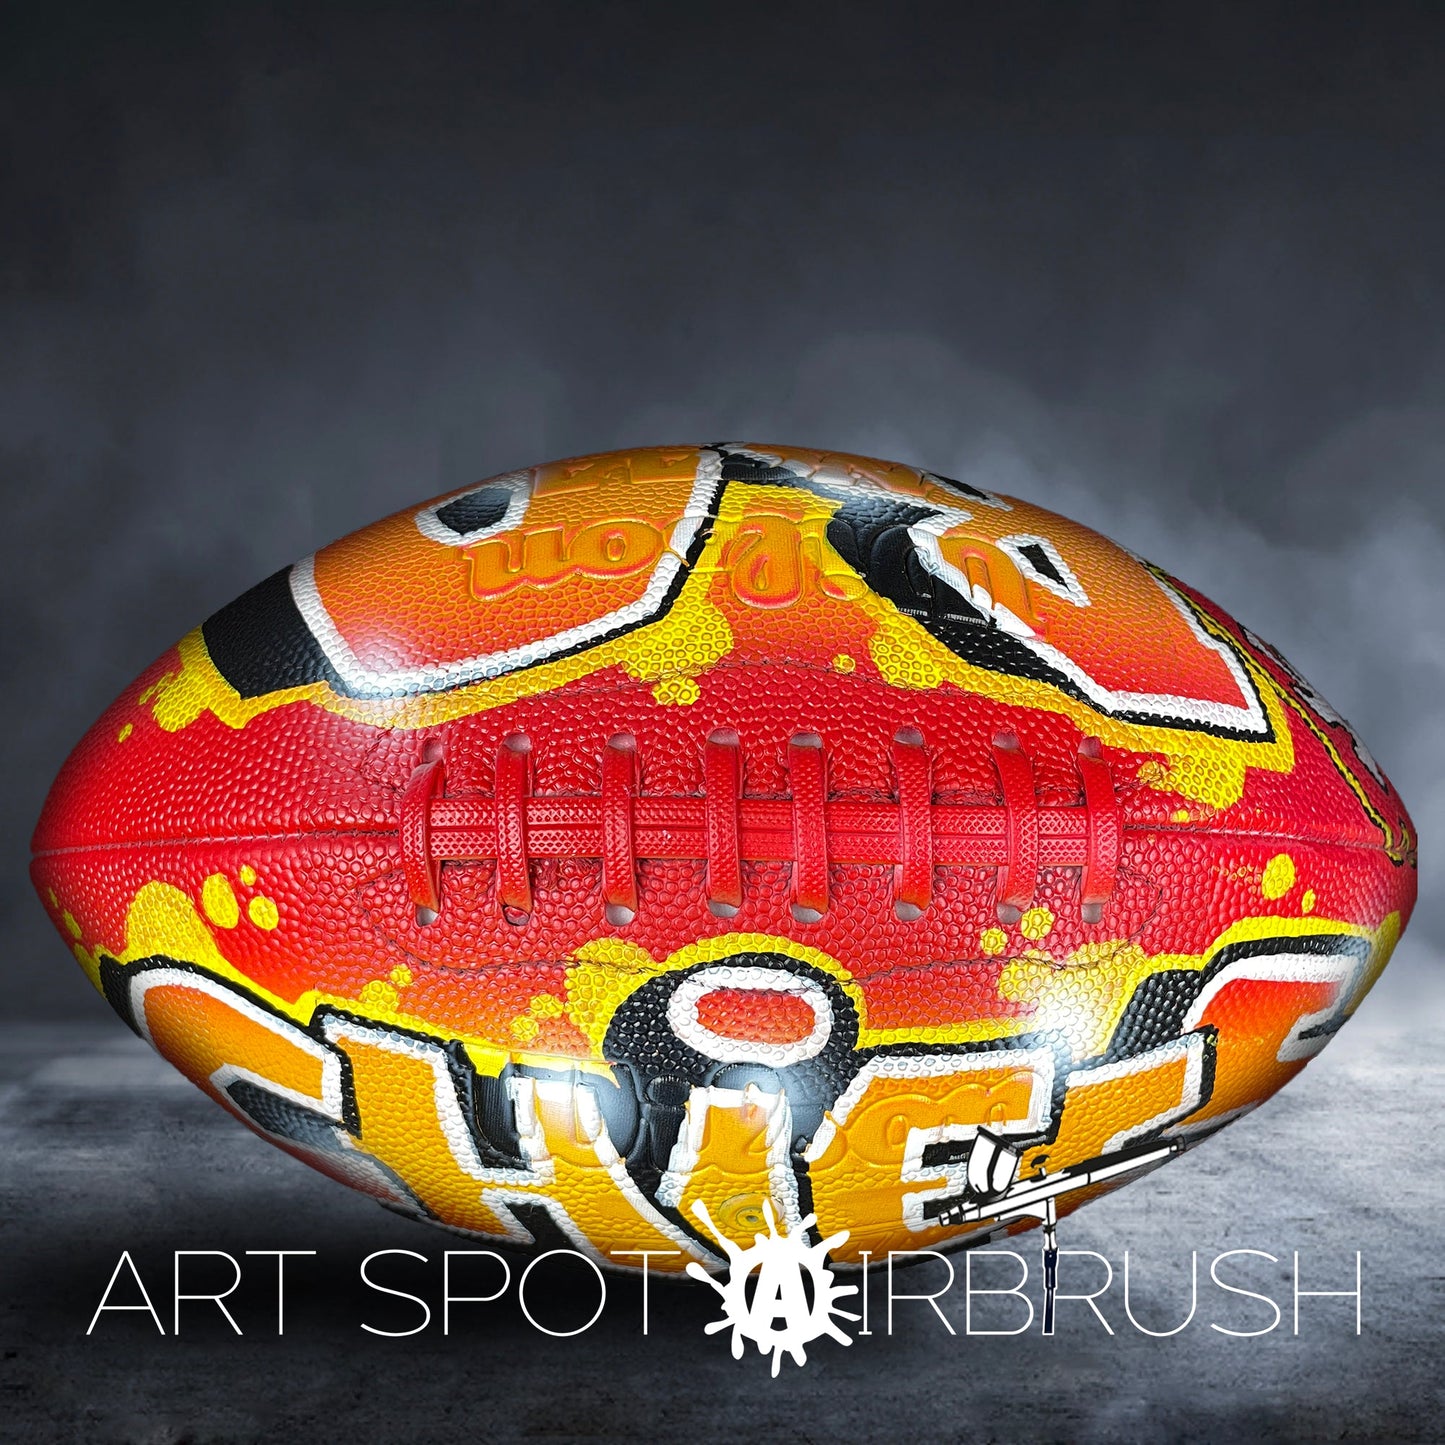 Football Personalized with a Name in Graffiti Style